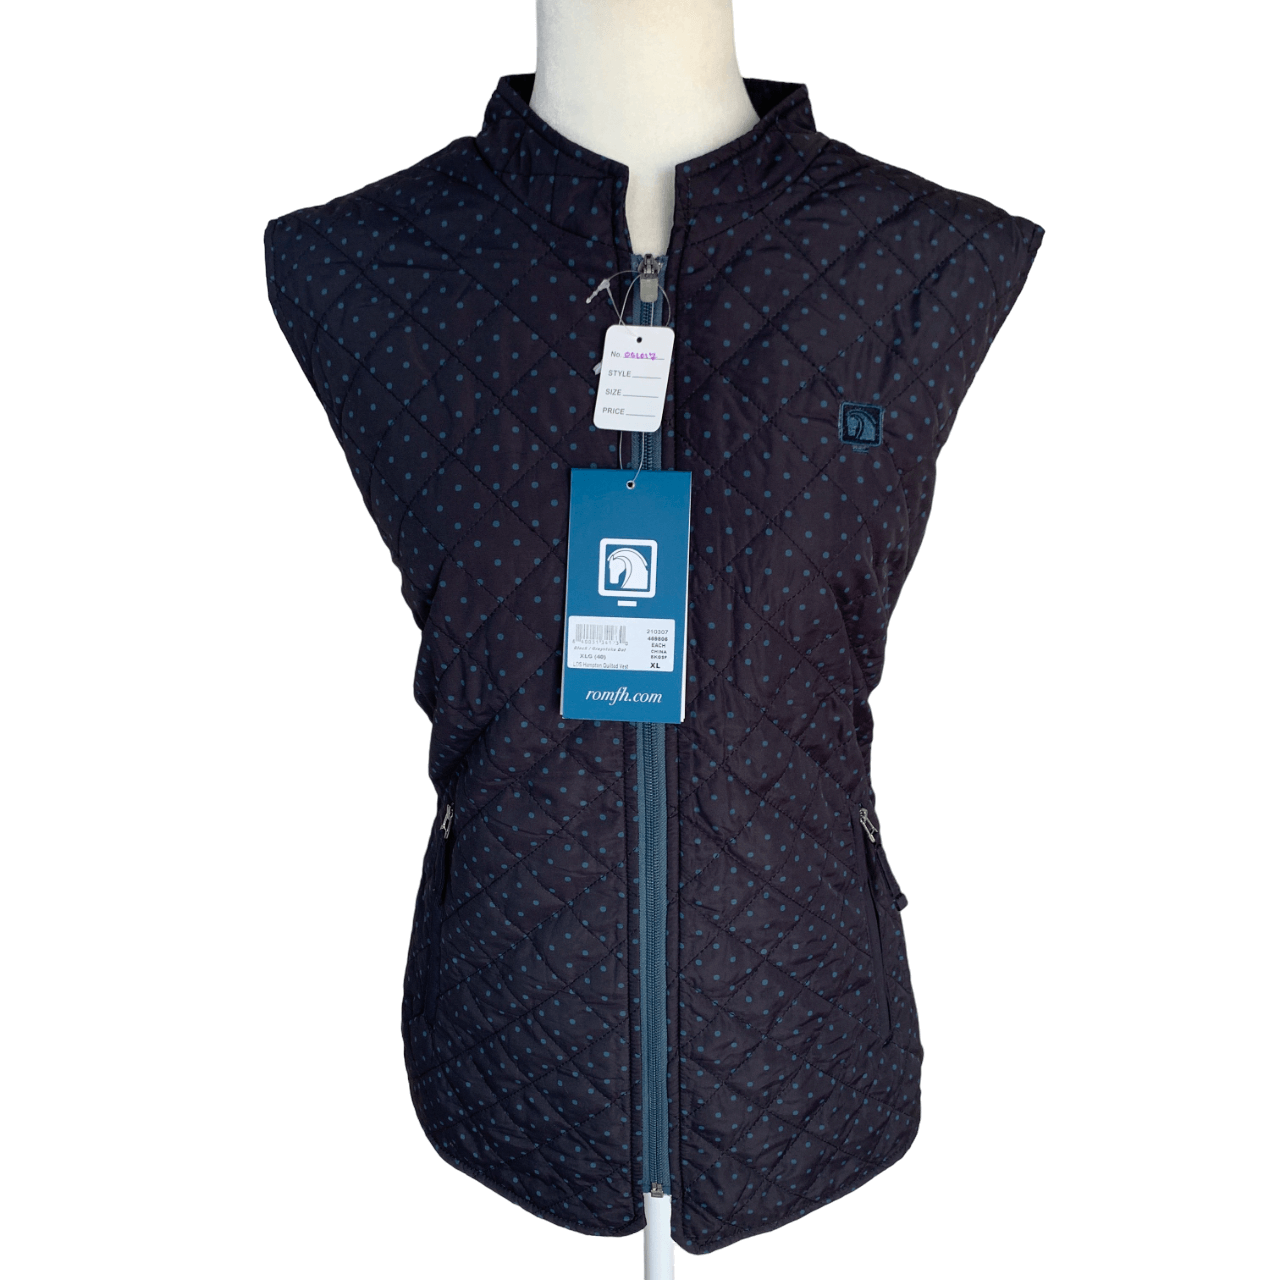 ROMFH 'Hampton' Quilted Vest in Navy / Blue - Woman's X-Large